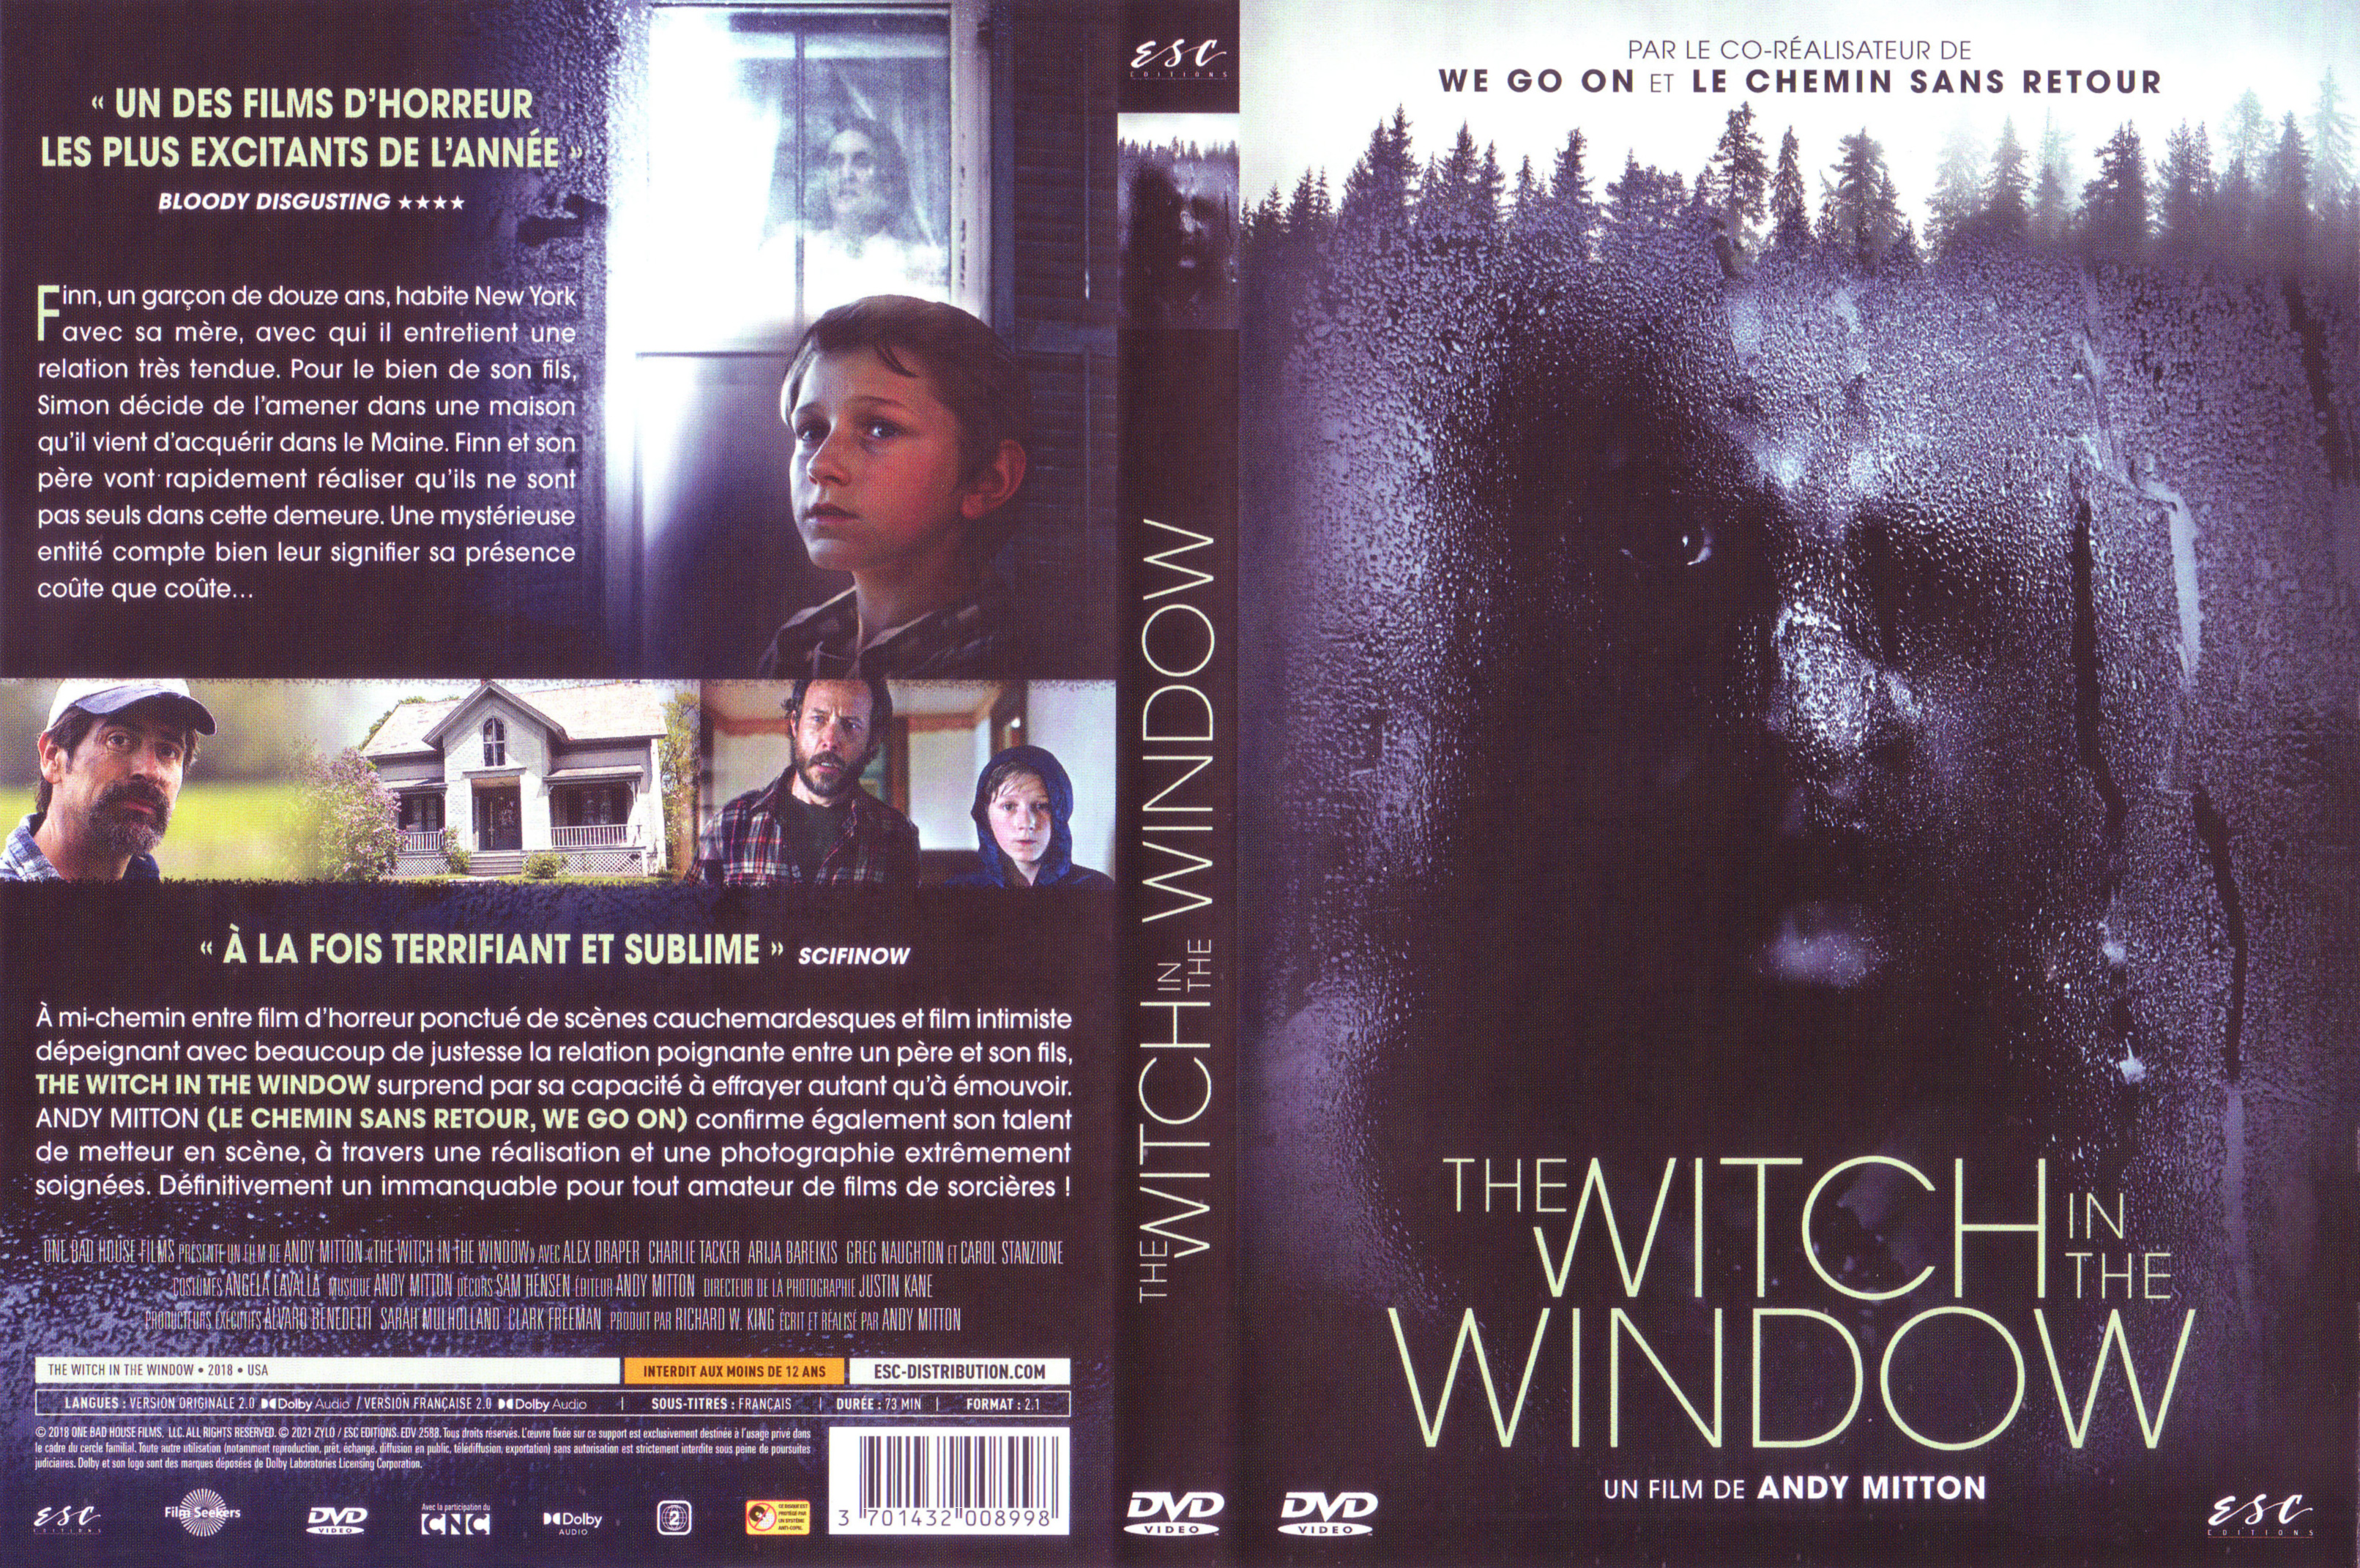 Jaquette DVD The witch in the window